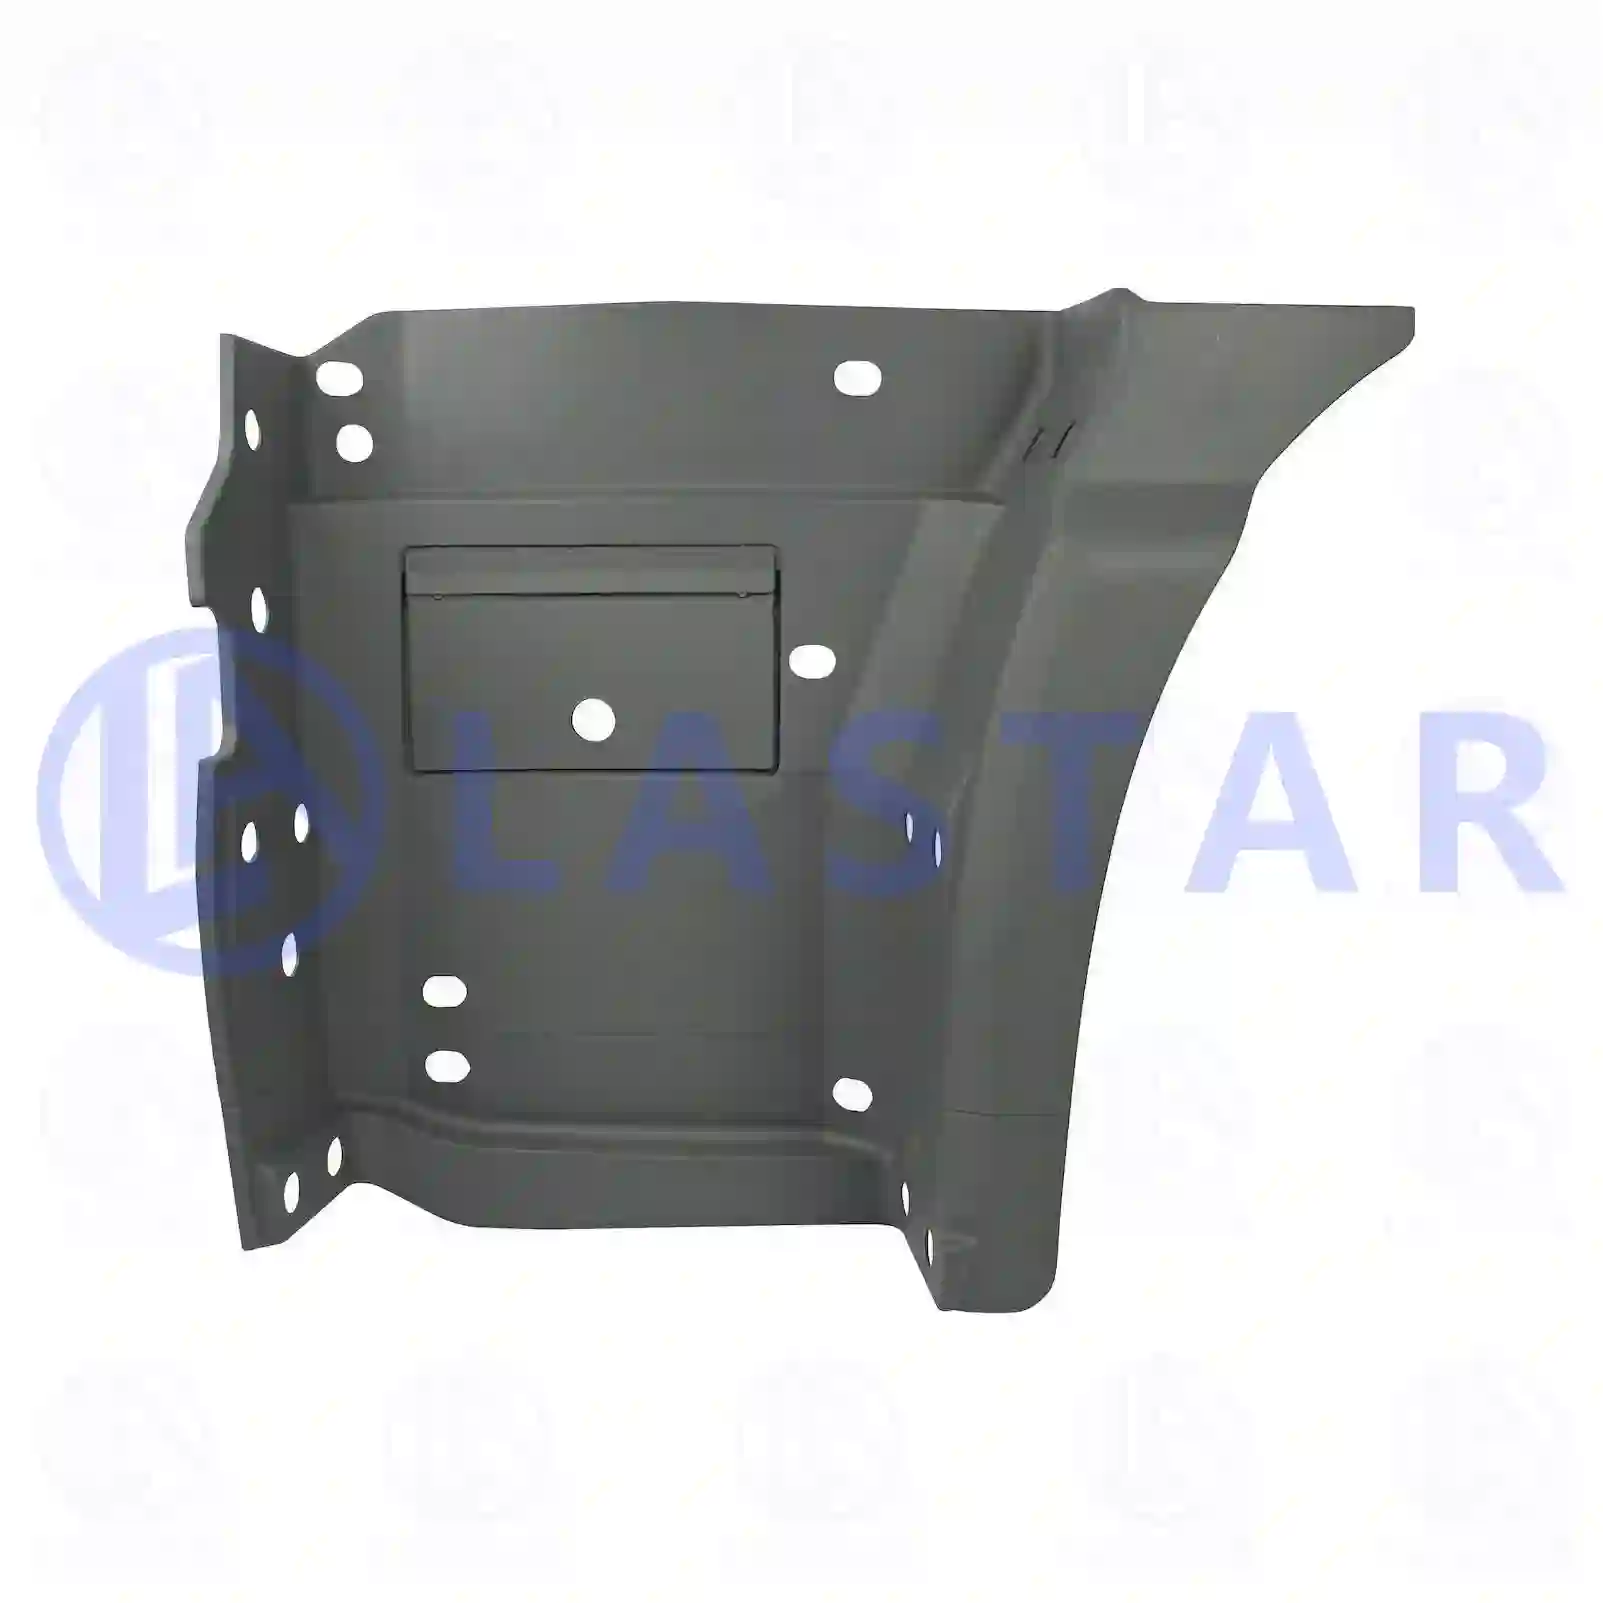 Step well case, left, 77718831, 9416600401, 94166004017C72 ||  77718831 Lastar Spare Part | Truck Spare Parts, Auotomotive Spare Parts Step well case, left, 77718831, 9416600401, 94166004017C72 ||  77718831 Lastar Spare Part | Truck Spare Parts, Auotomotive Spare Parts